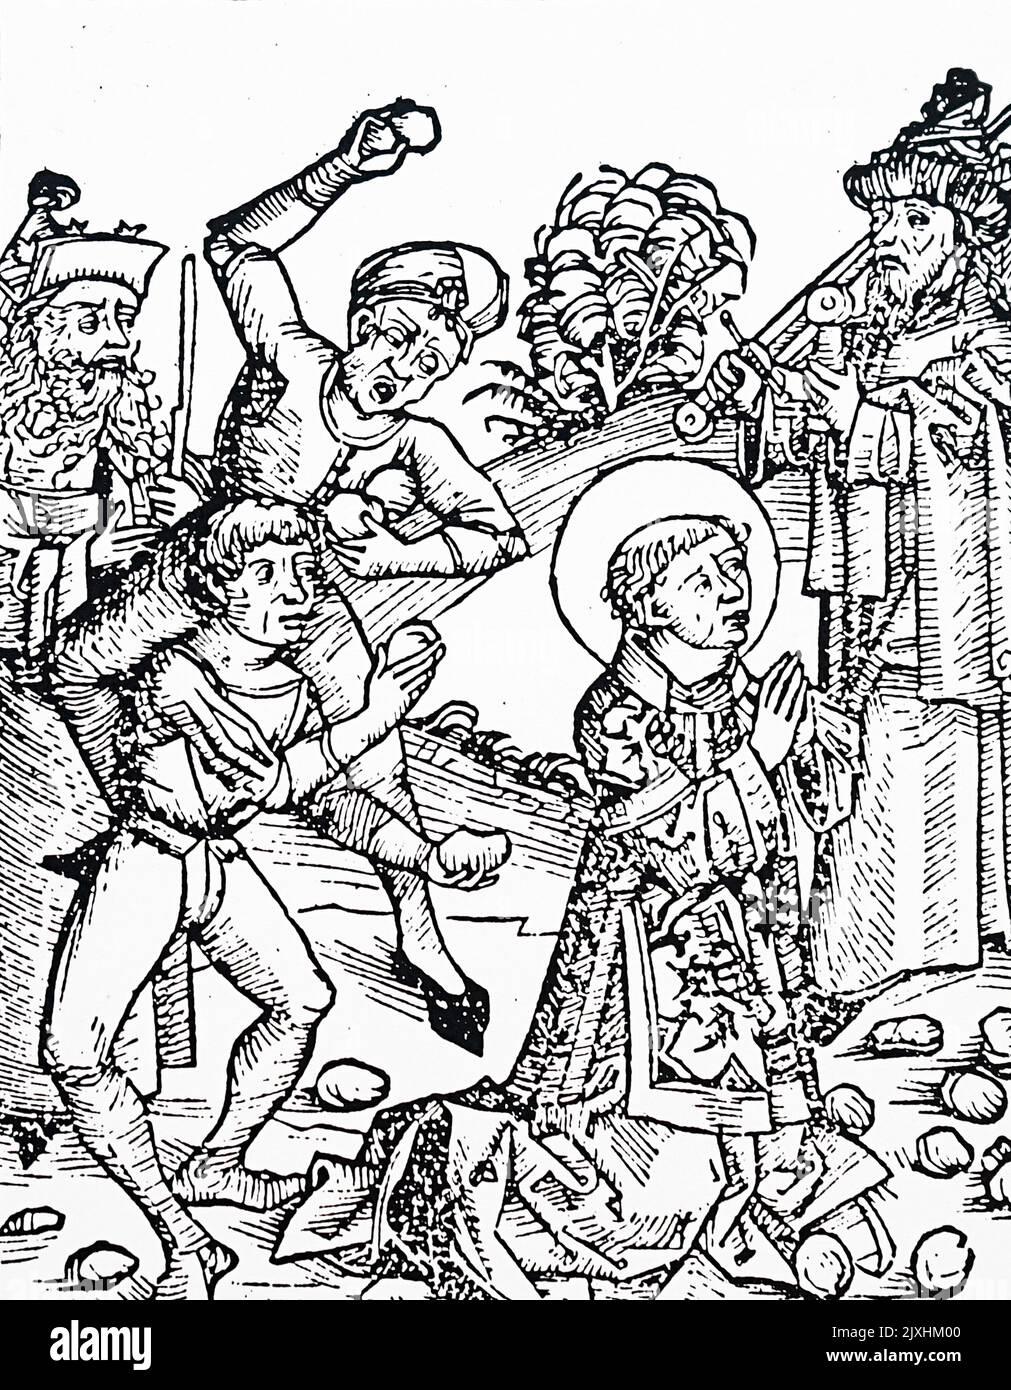 Woodcut depicting the martyrdom of Saint Stephen by being stoned to death. Dated 15th Century Stock Photo